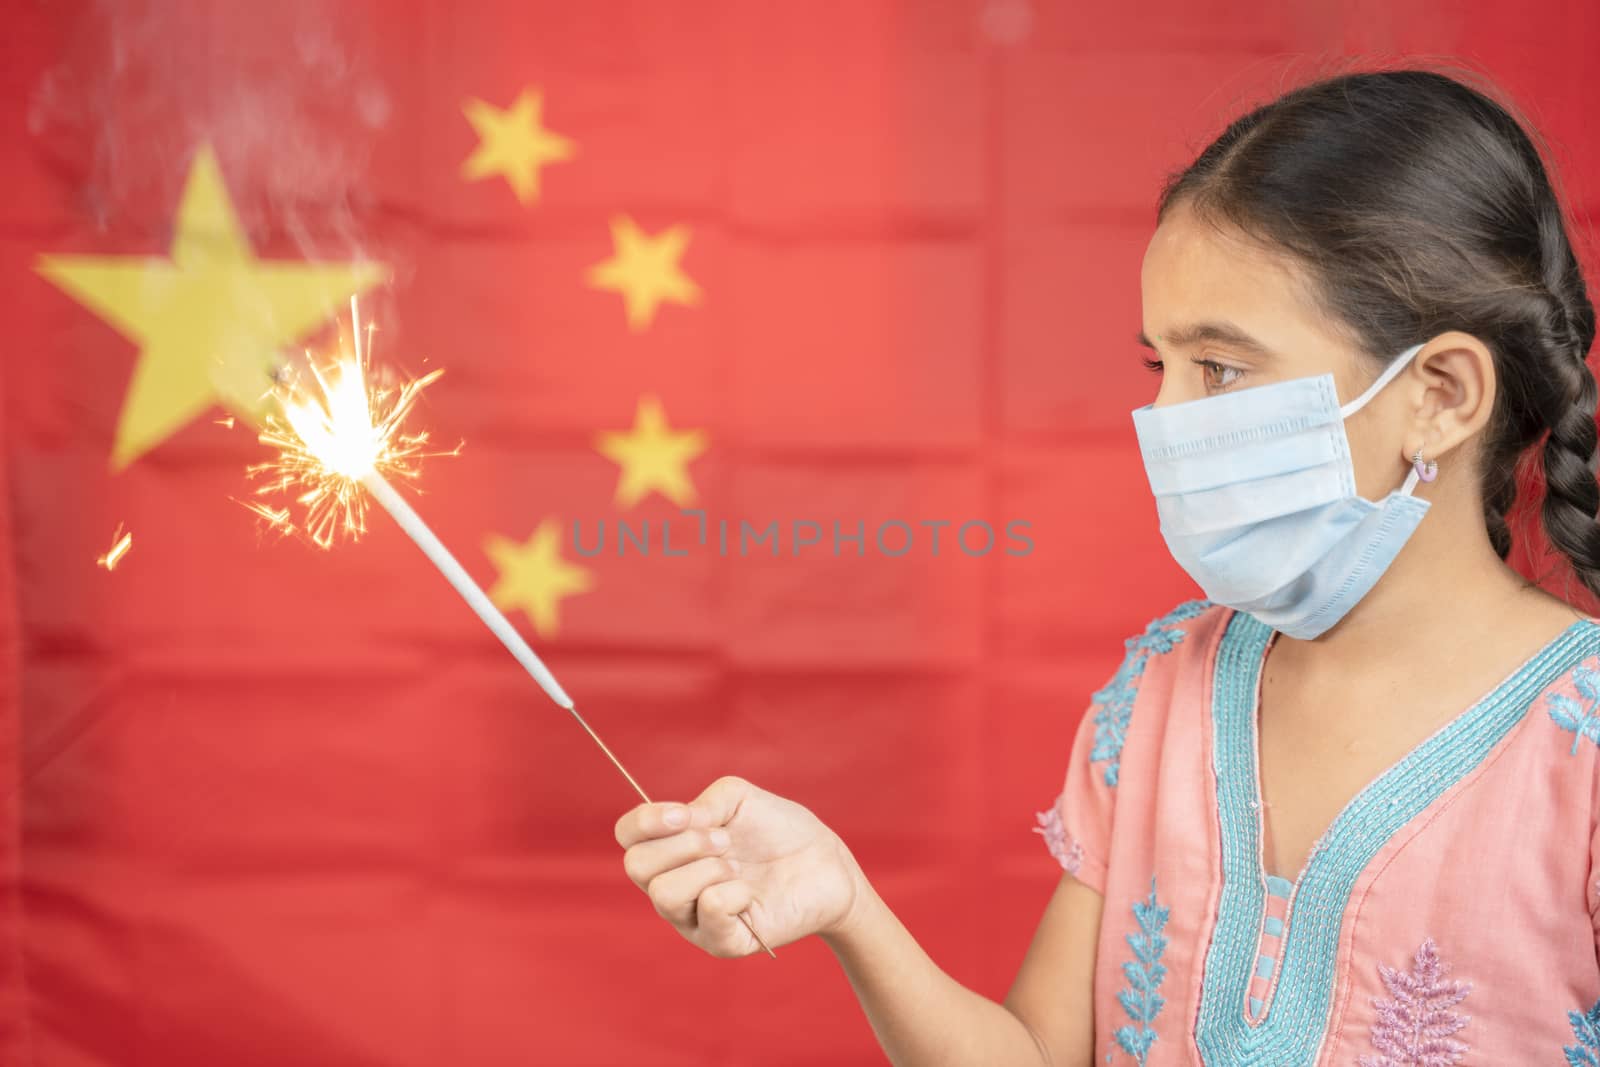 Young Girl Kid on medical mask holding Sparkler with Chinese flag as background - concept showing Celebration of Chinas National or Republic Day by lakshmiprasad.maski@gmai.com